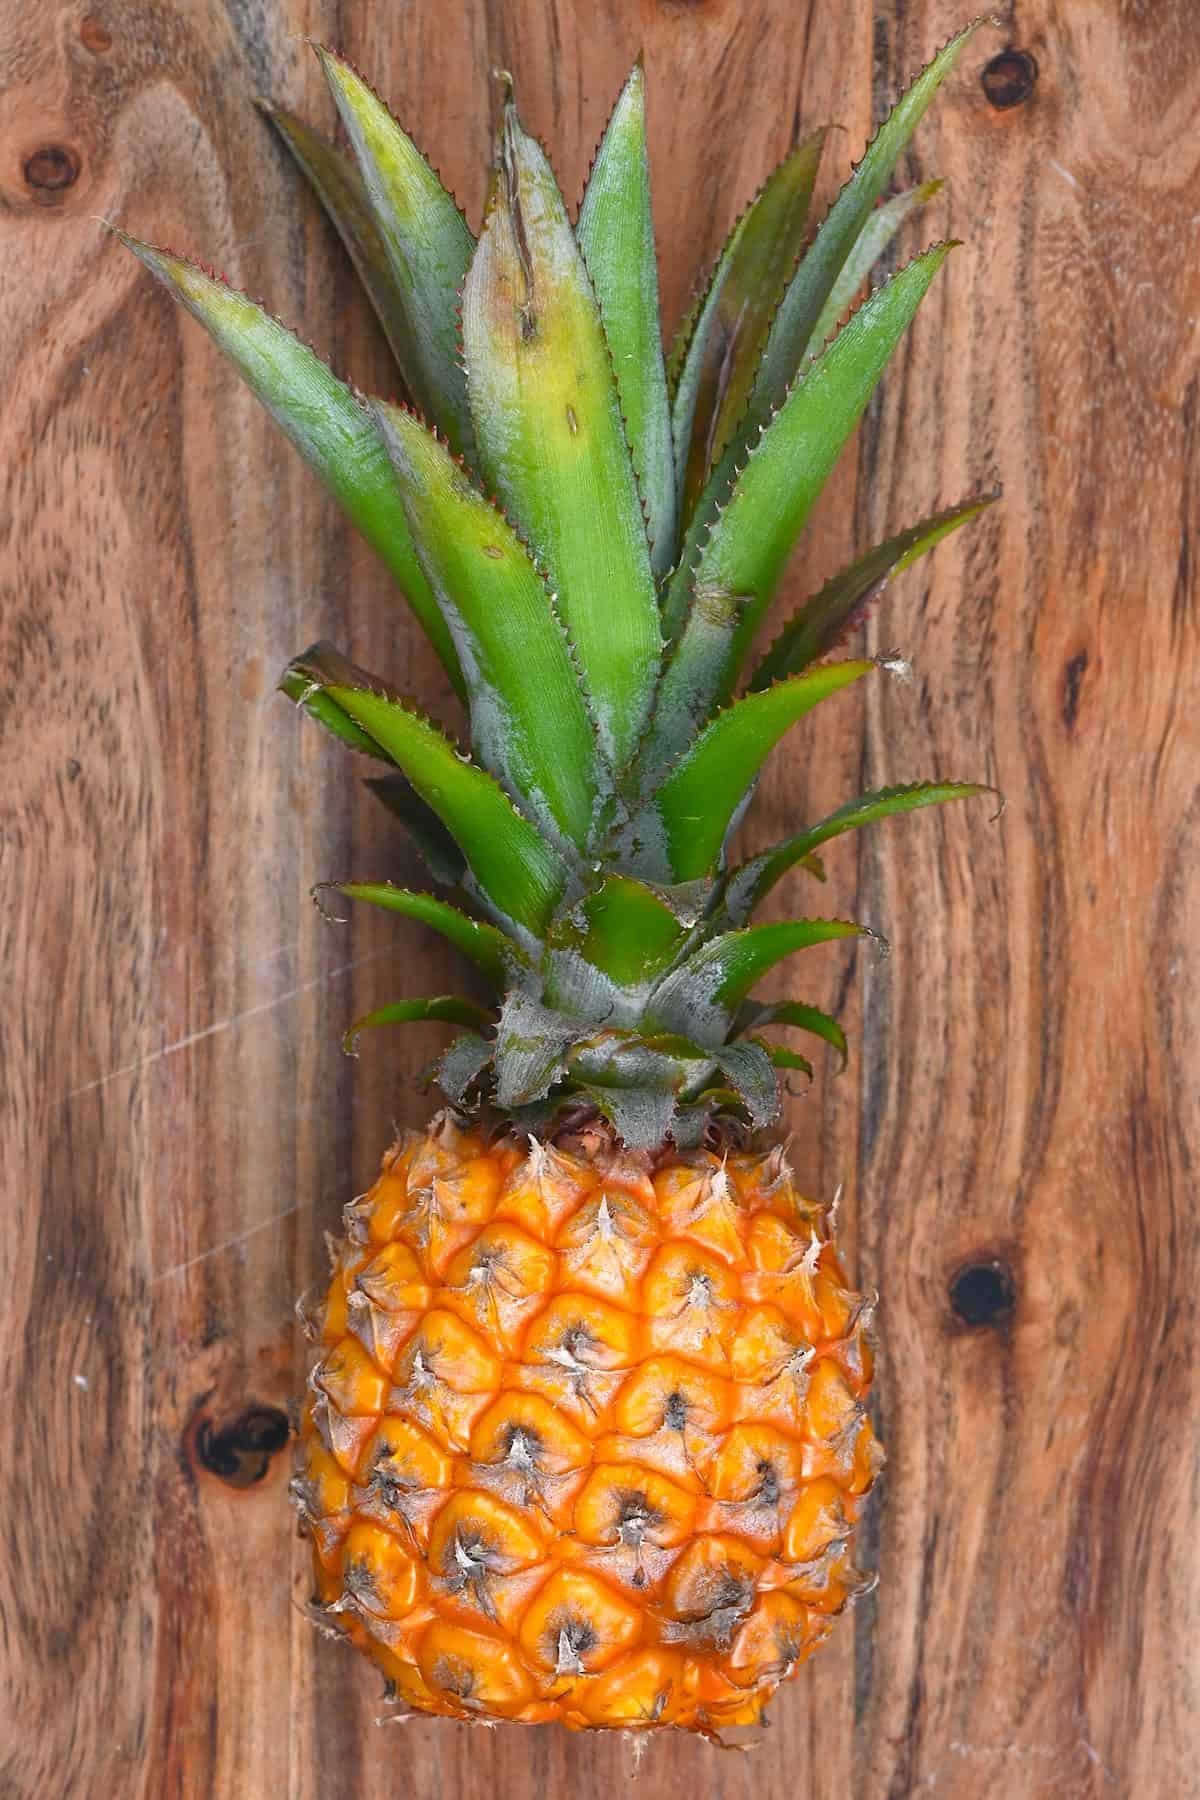 A small pineapple laying on a wooden board